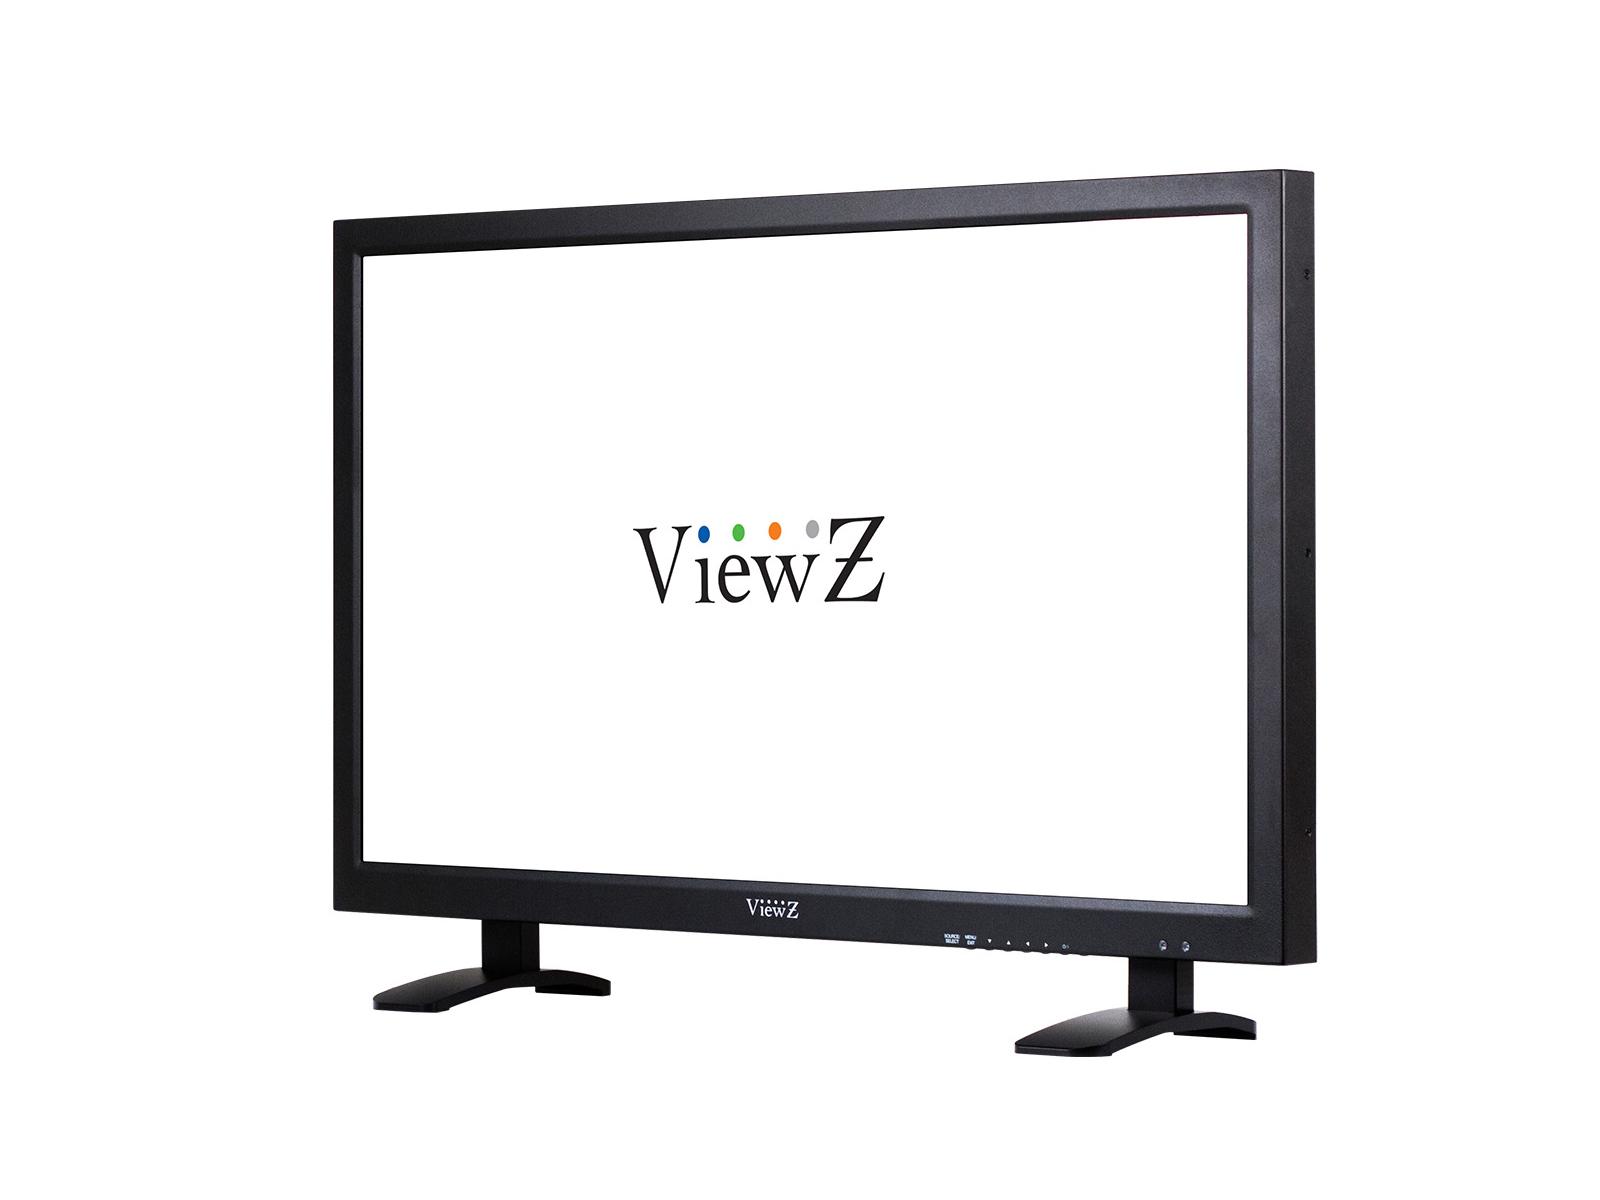 ViewZ VZ-32IPM 32 inch 1920x1080 Full HD LED IP Input Monitor with Android OS